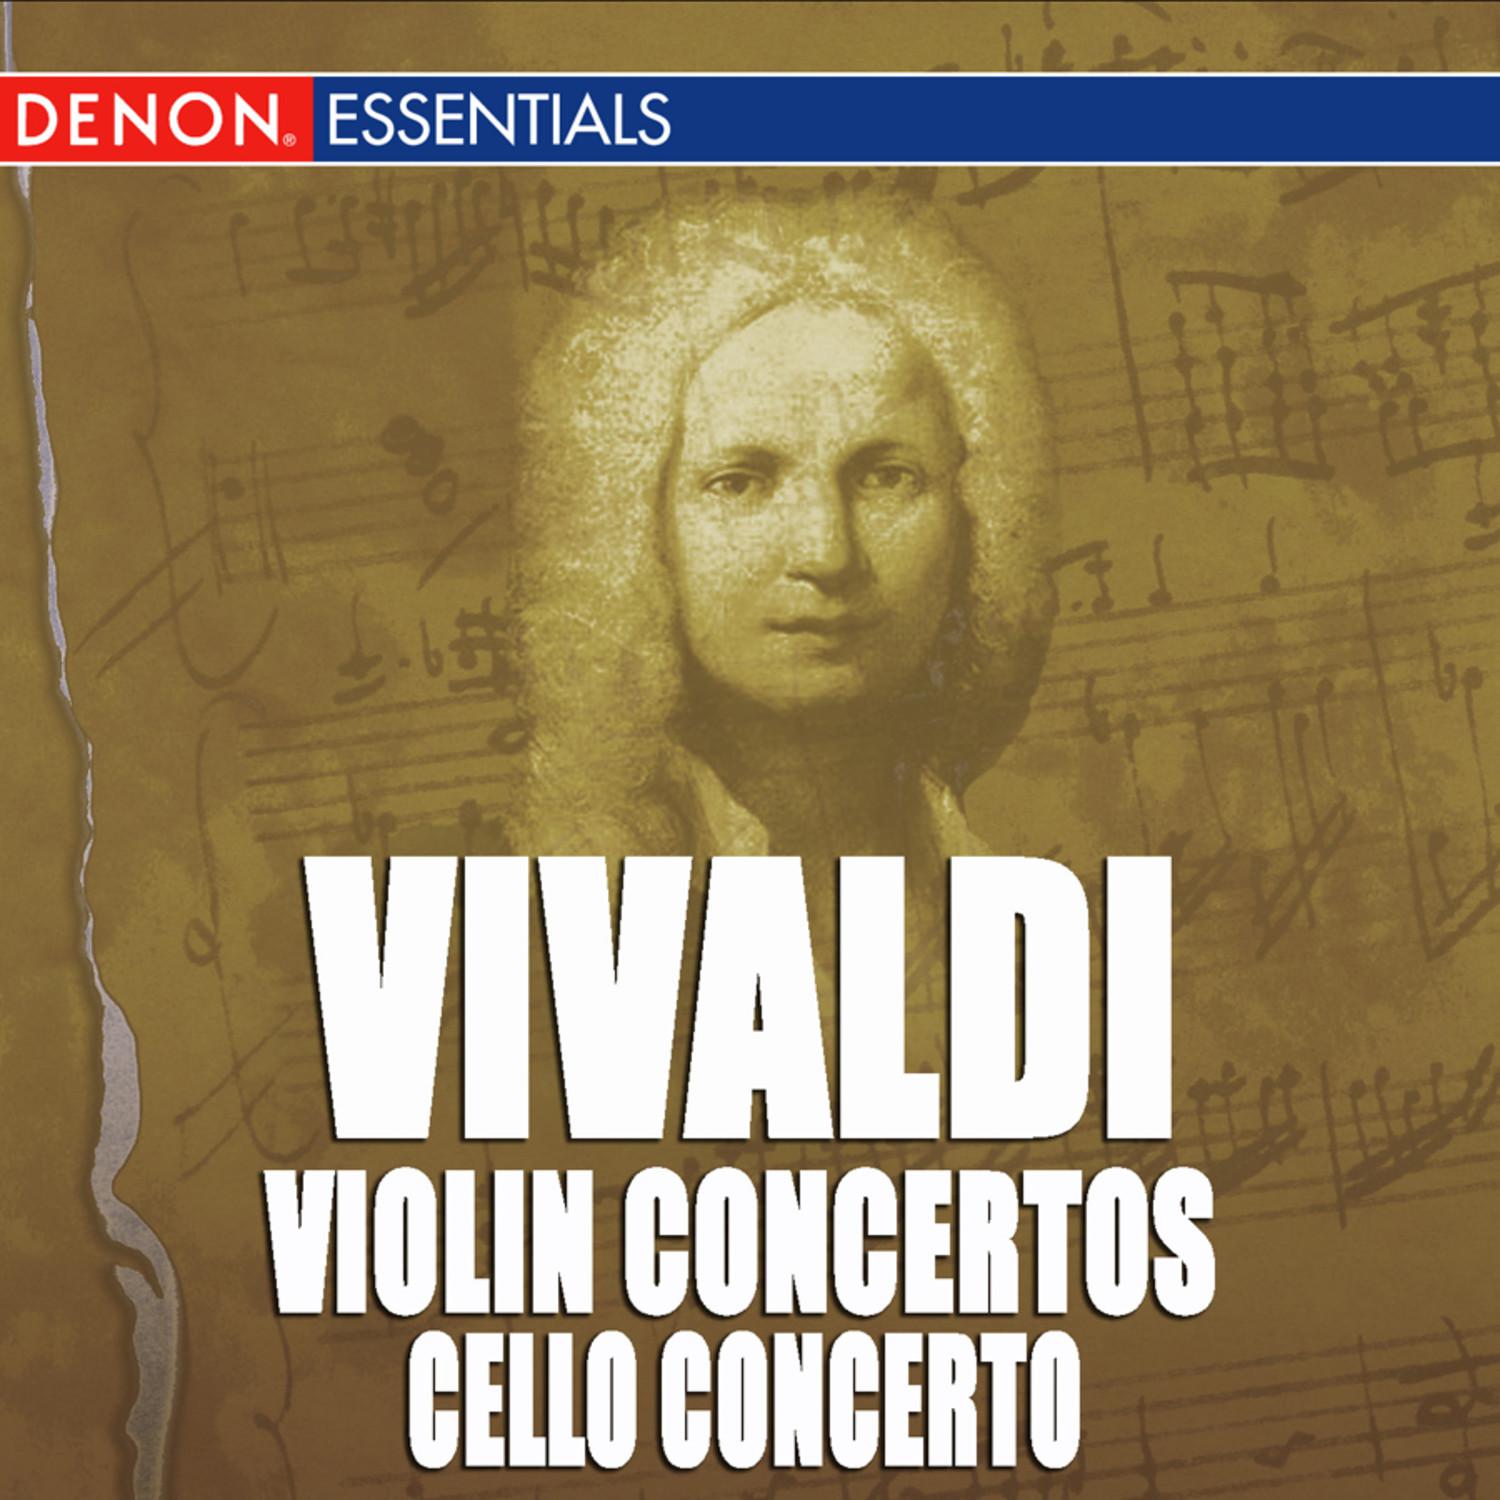 Concerto for 4 Violins, Cello, Strings and Bc No. 1 in D Major, Op. 3 RV 549: I. Allegro